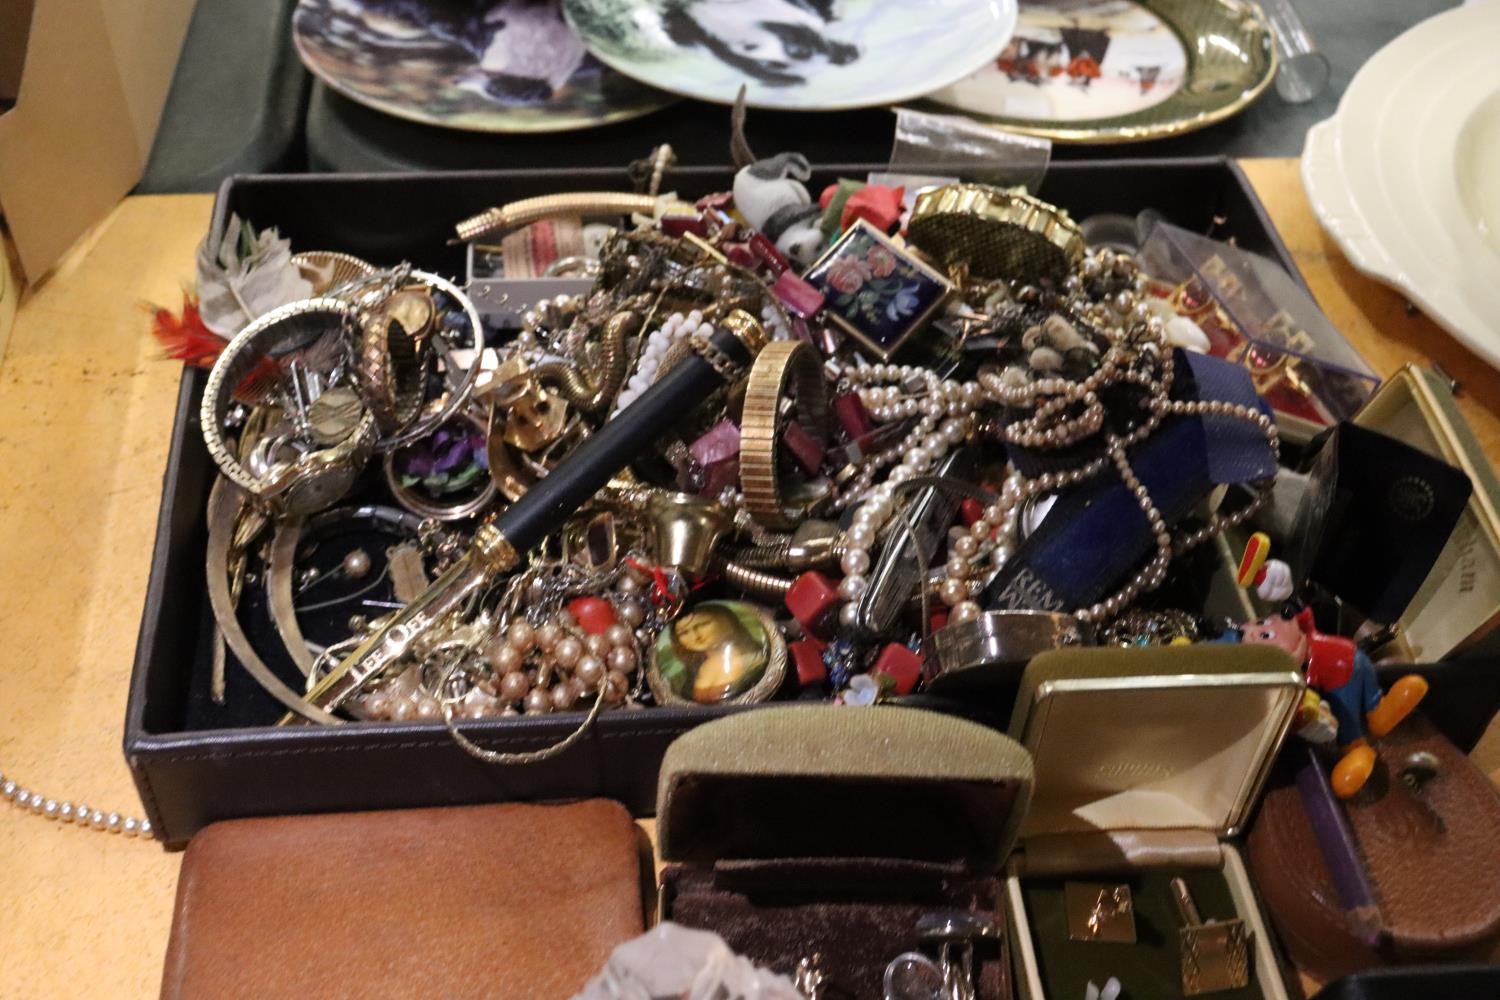 A QUANTITY OF ITEMS TO INCLUDE CUFFLINKS, MIRRORED COMPACTS, LIGHTERS, JEWELLERY, ETC., - Image 4 of 6